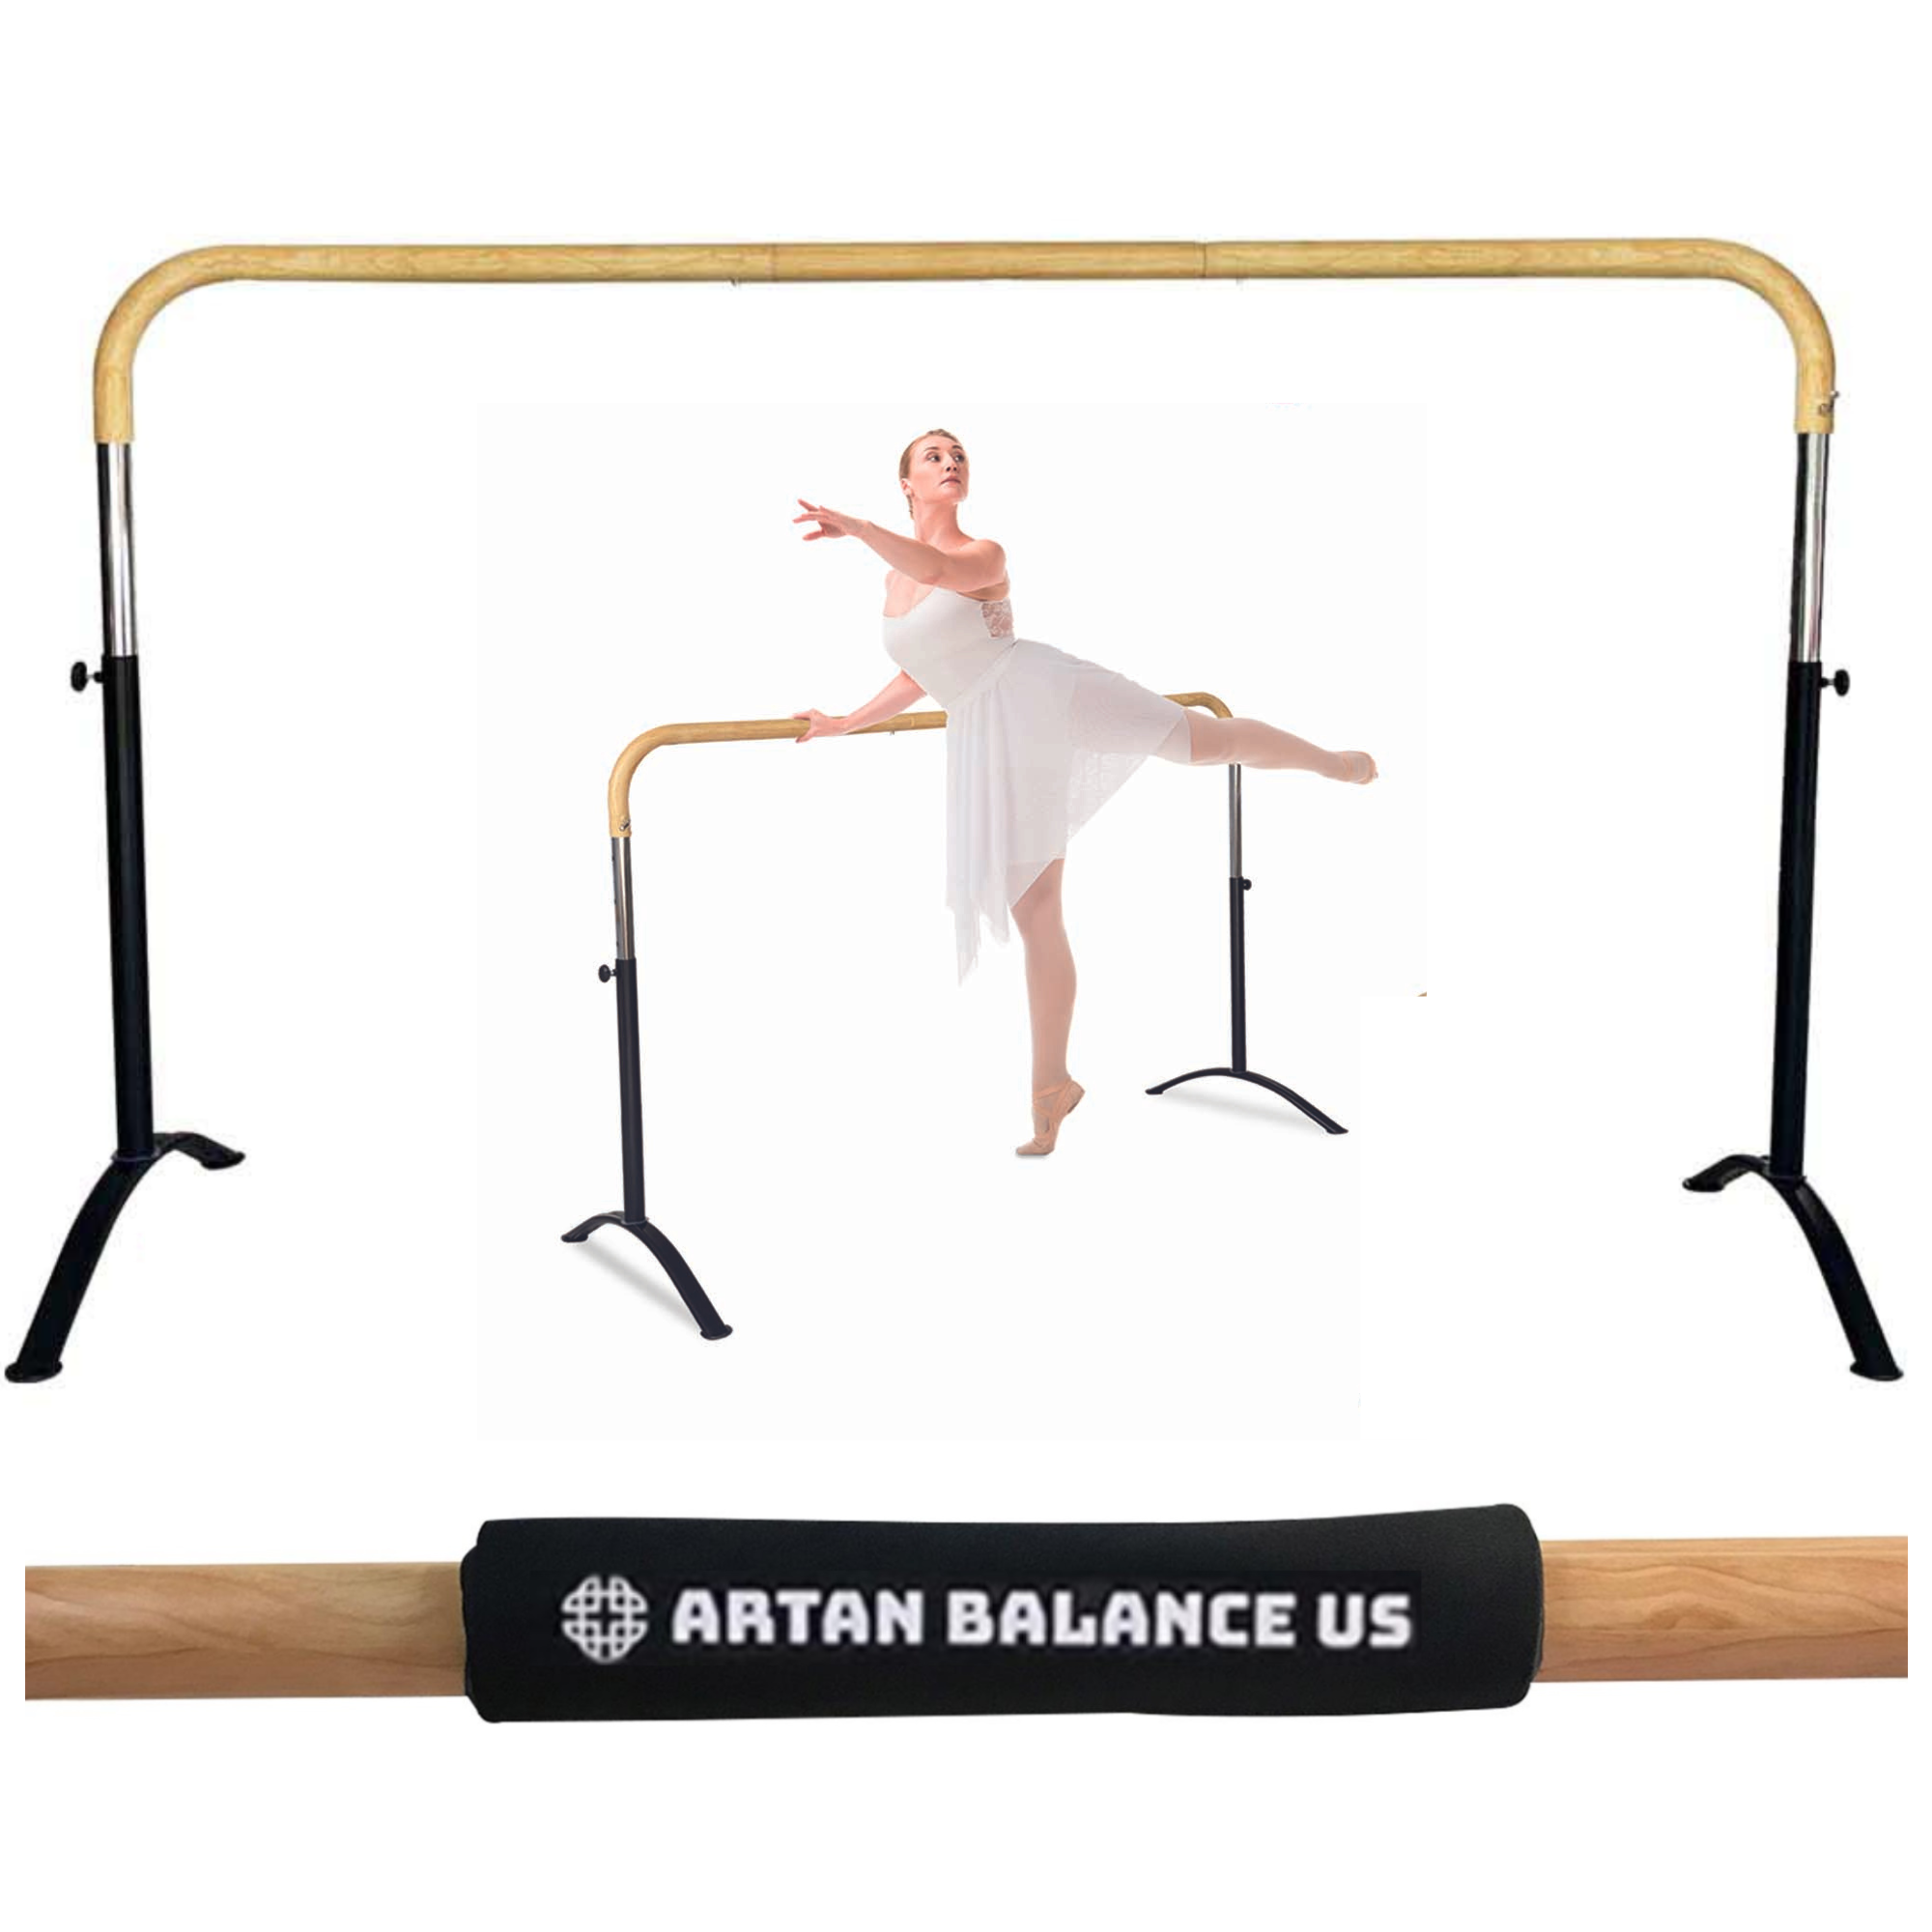 Portable Ballet Barres for Barre Fitness at Home